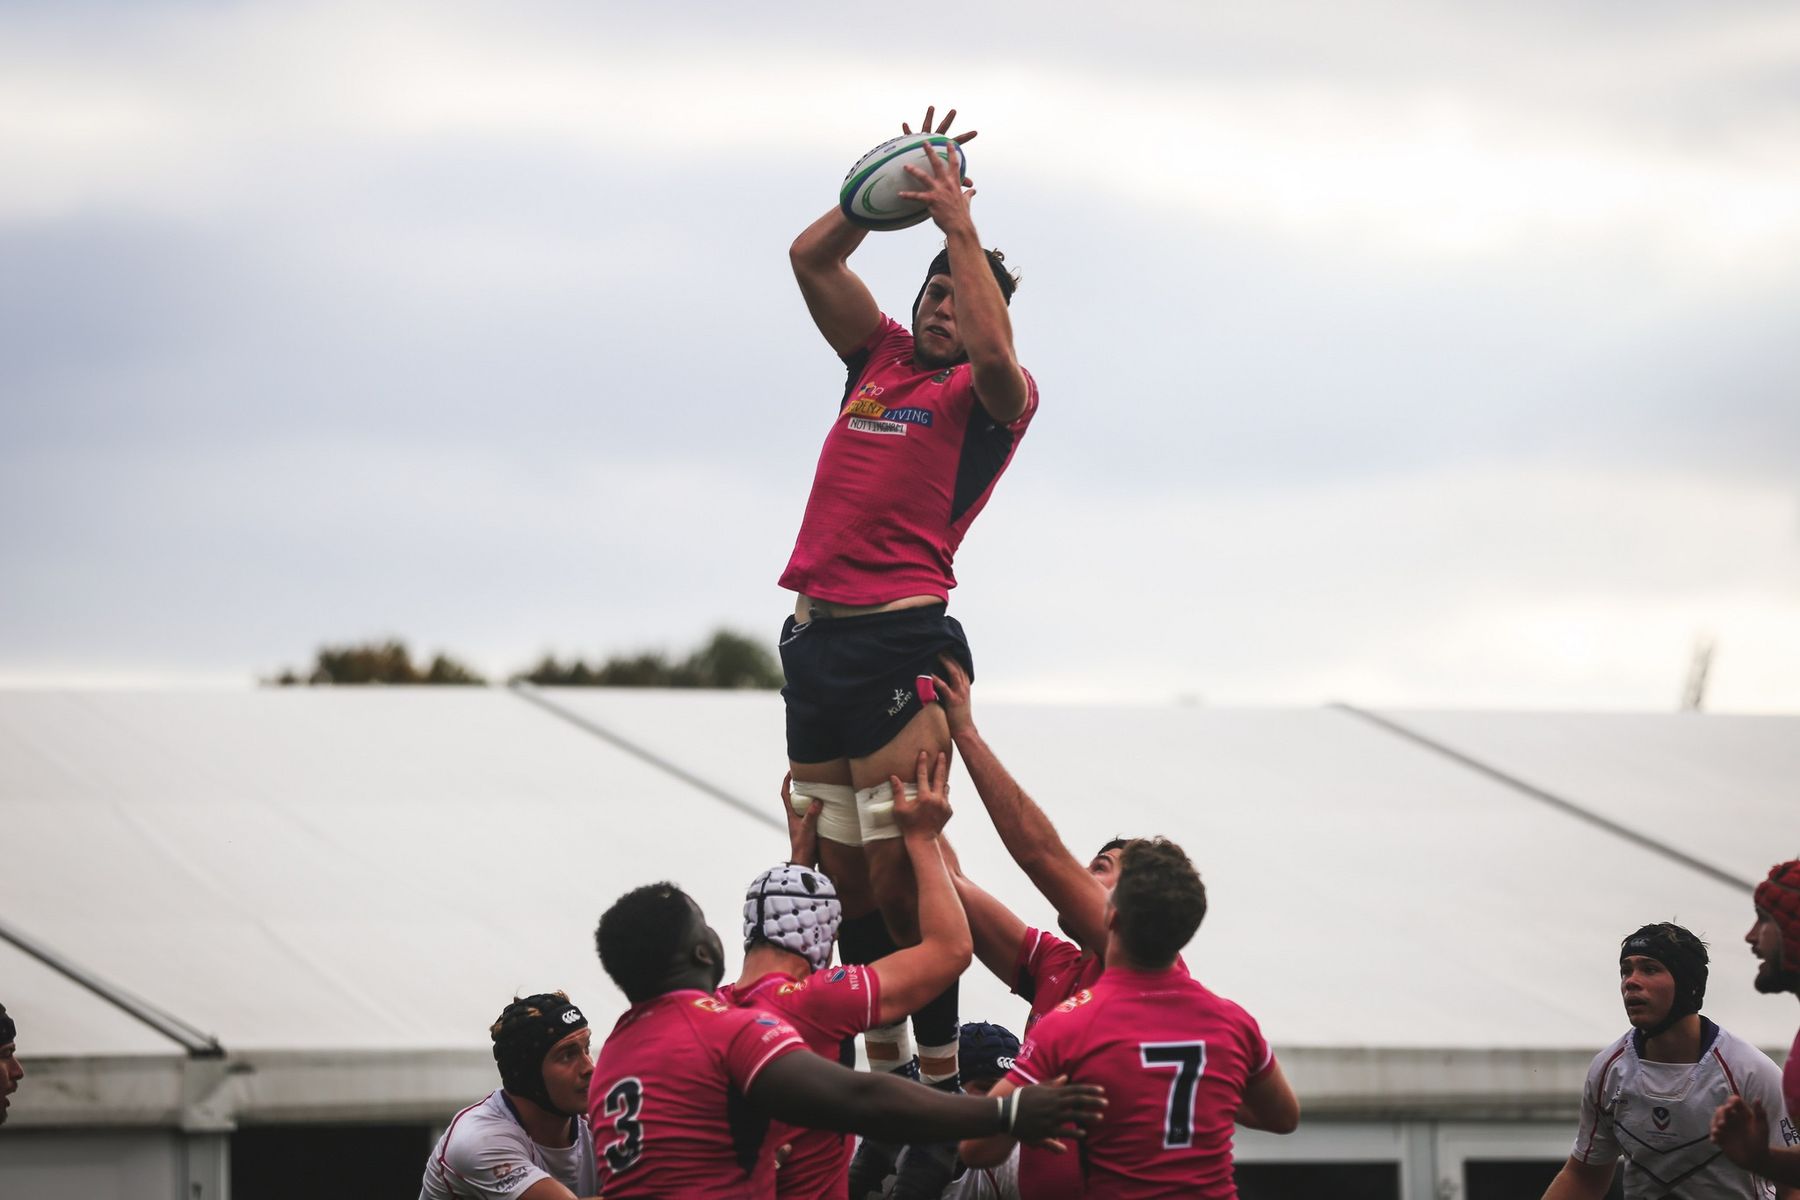 NTU Men's Rugby player goes up to catch the ball from a line out